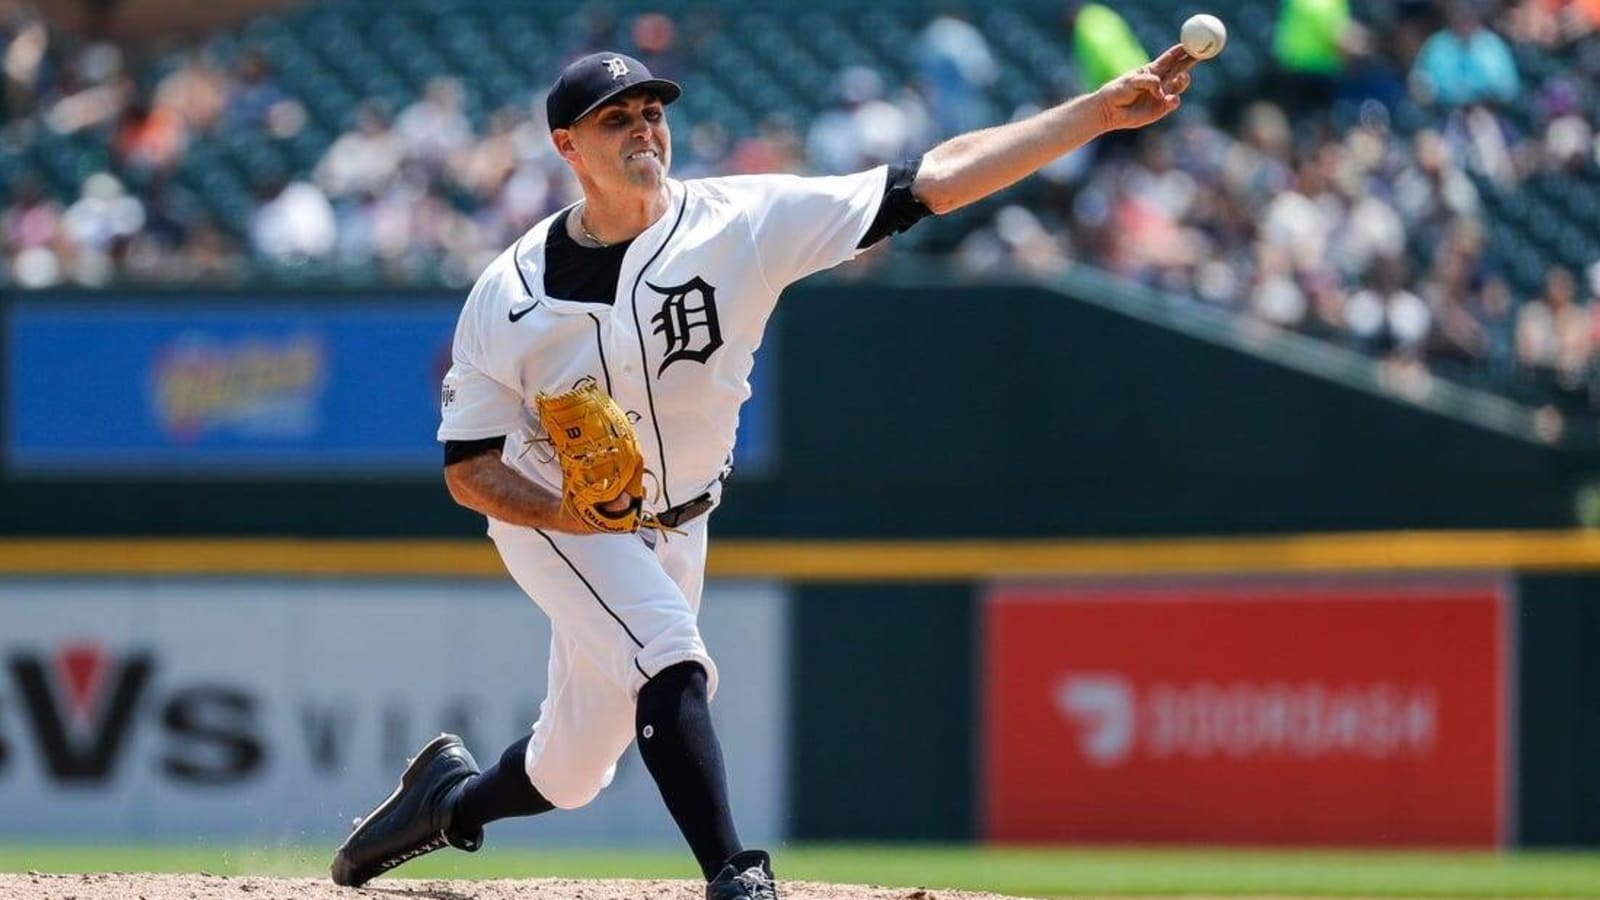 Tigers pitchers Matthew Boyd, Will Vest exit with injuries